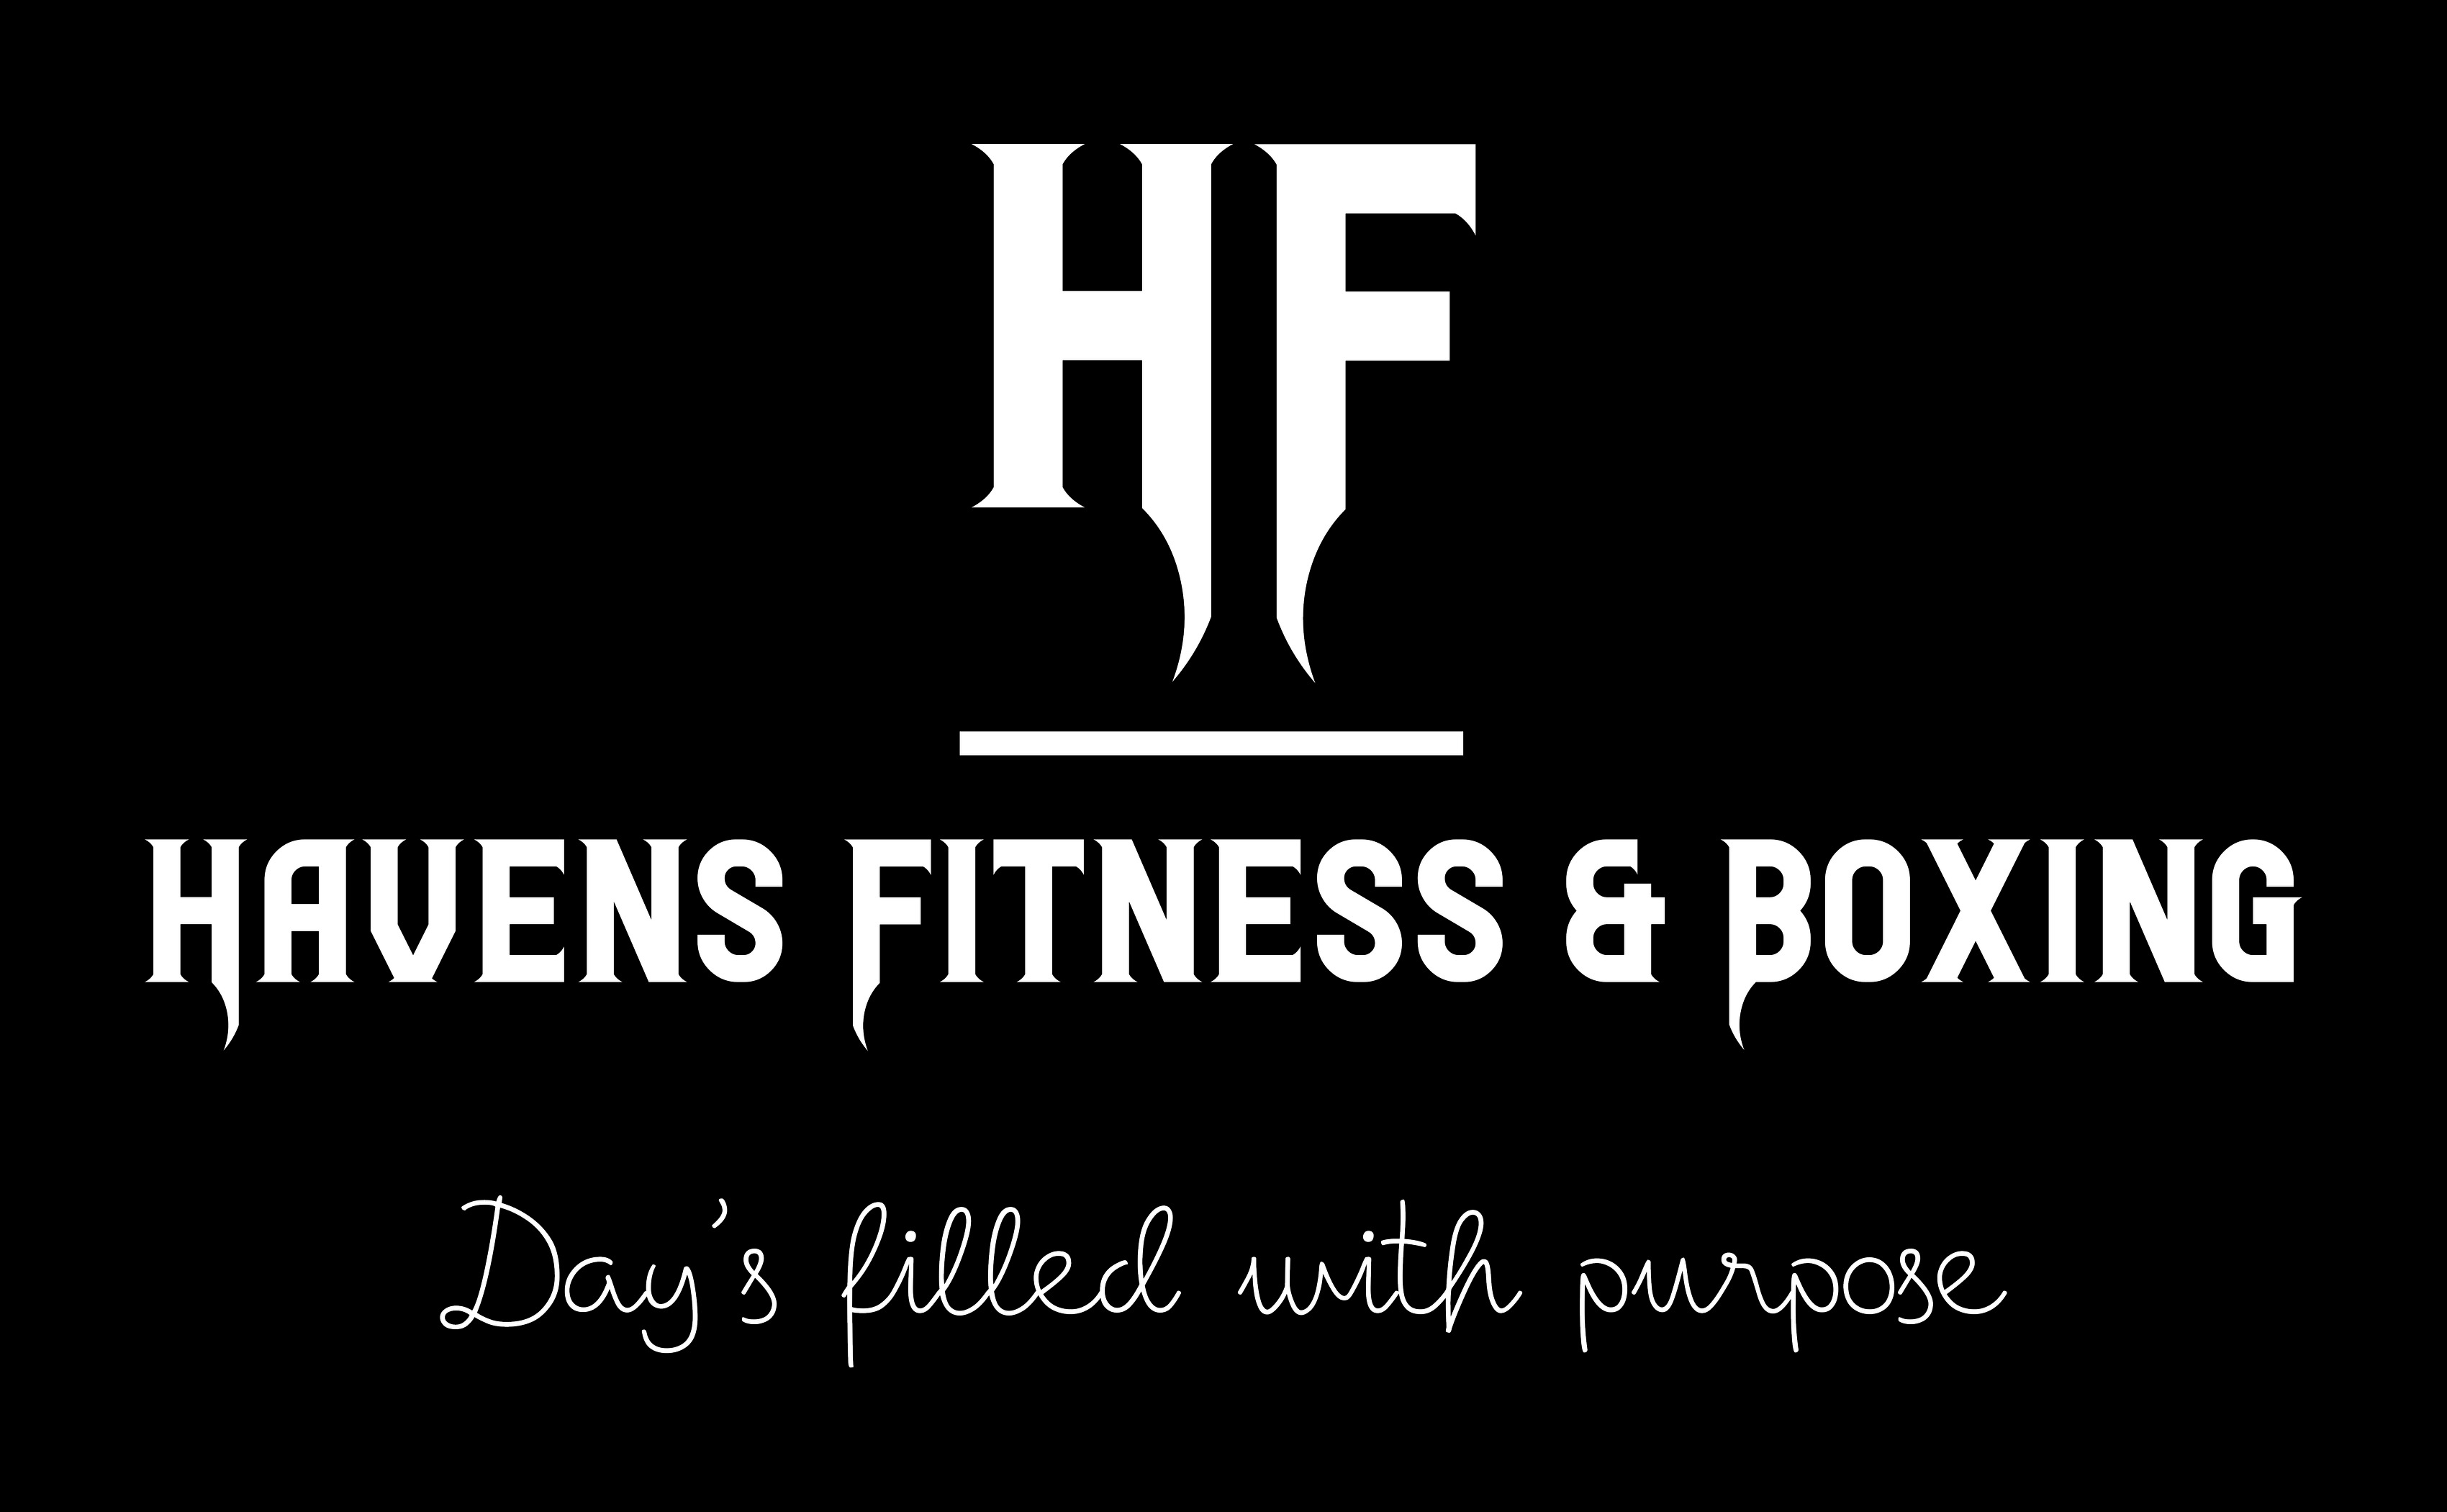 Havens Fitness & Boxing